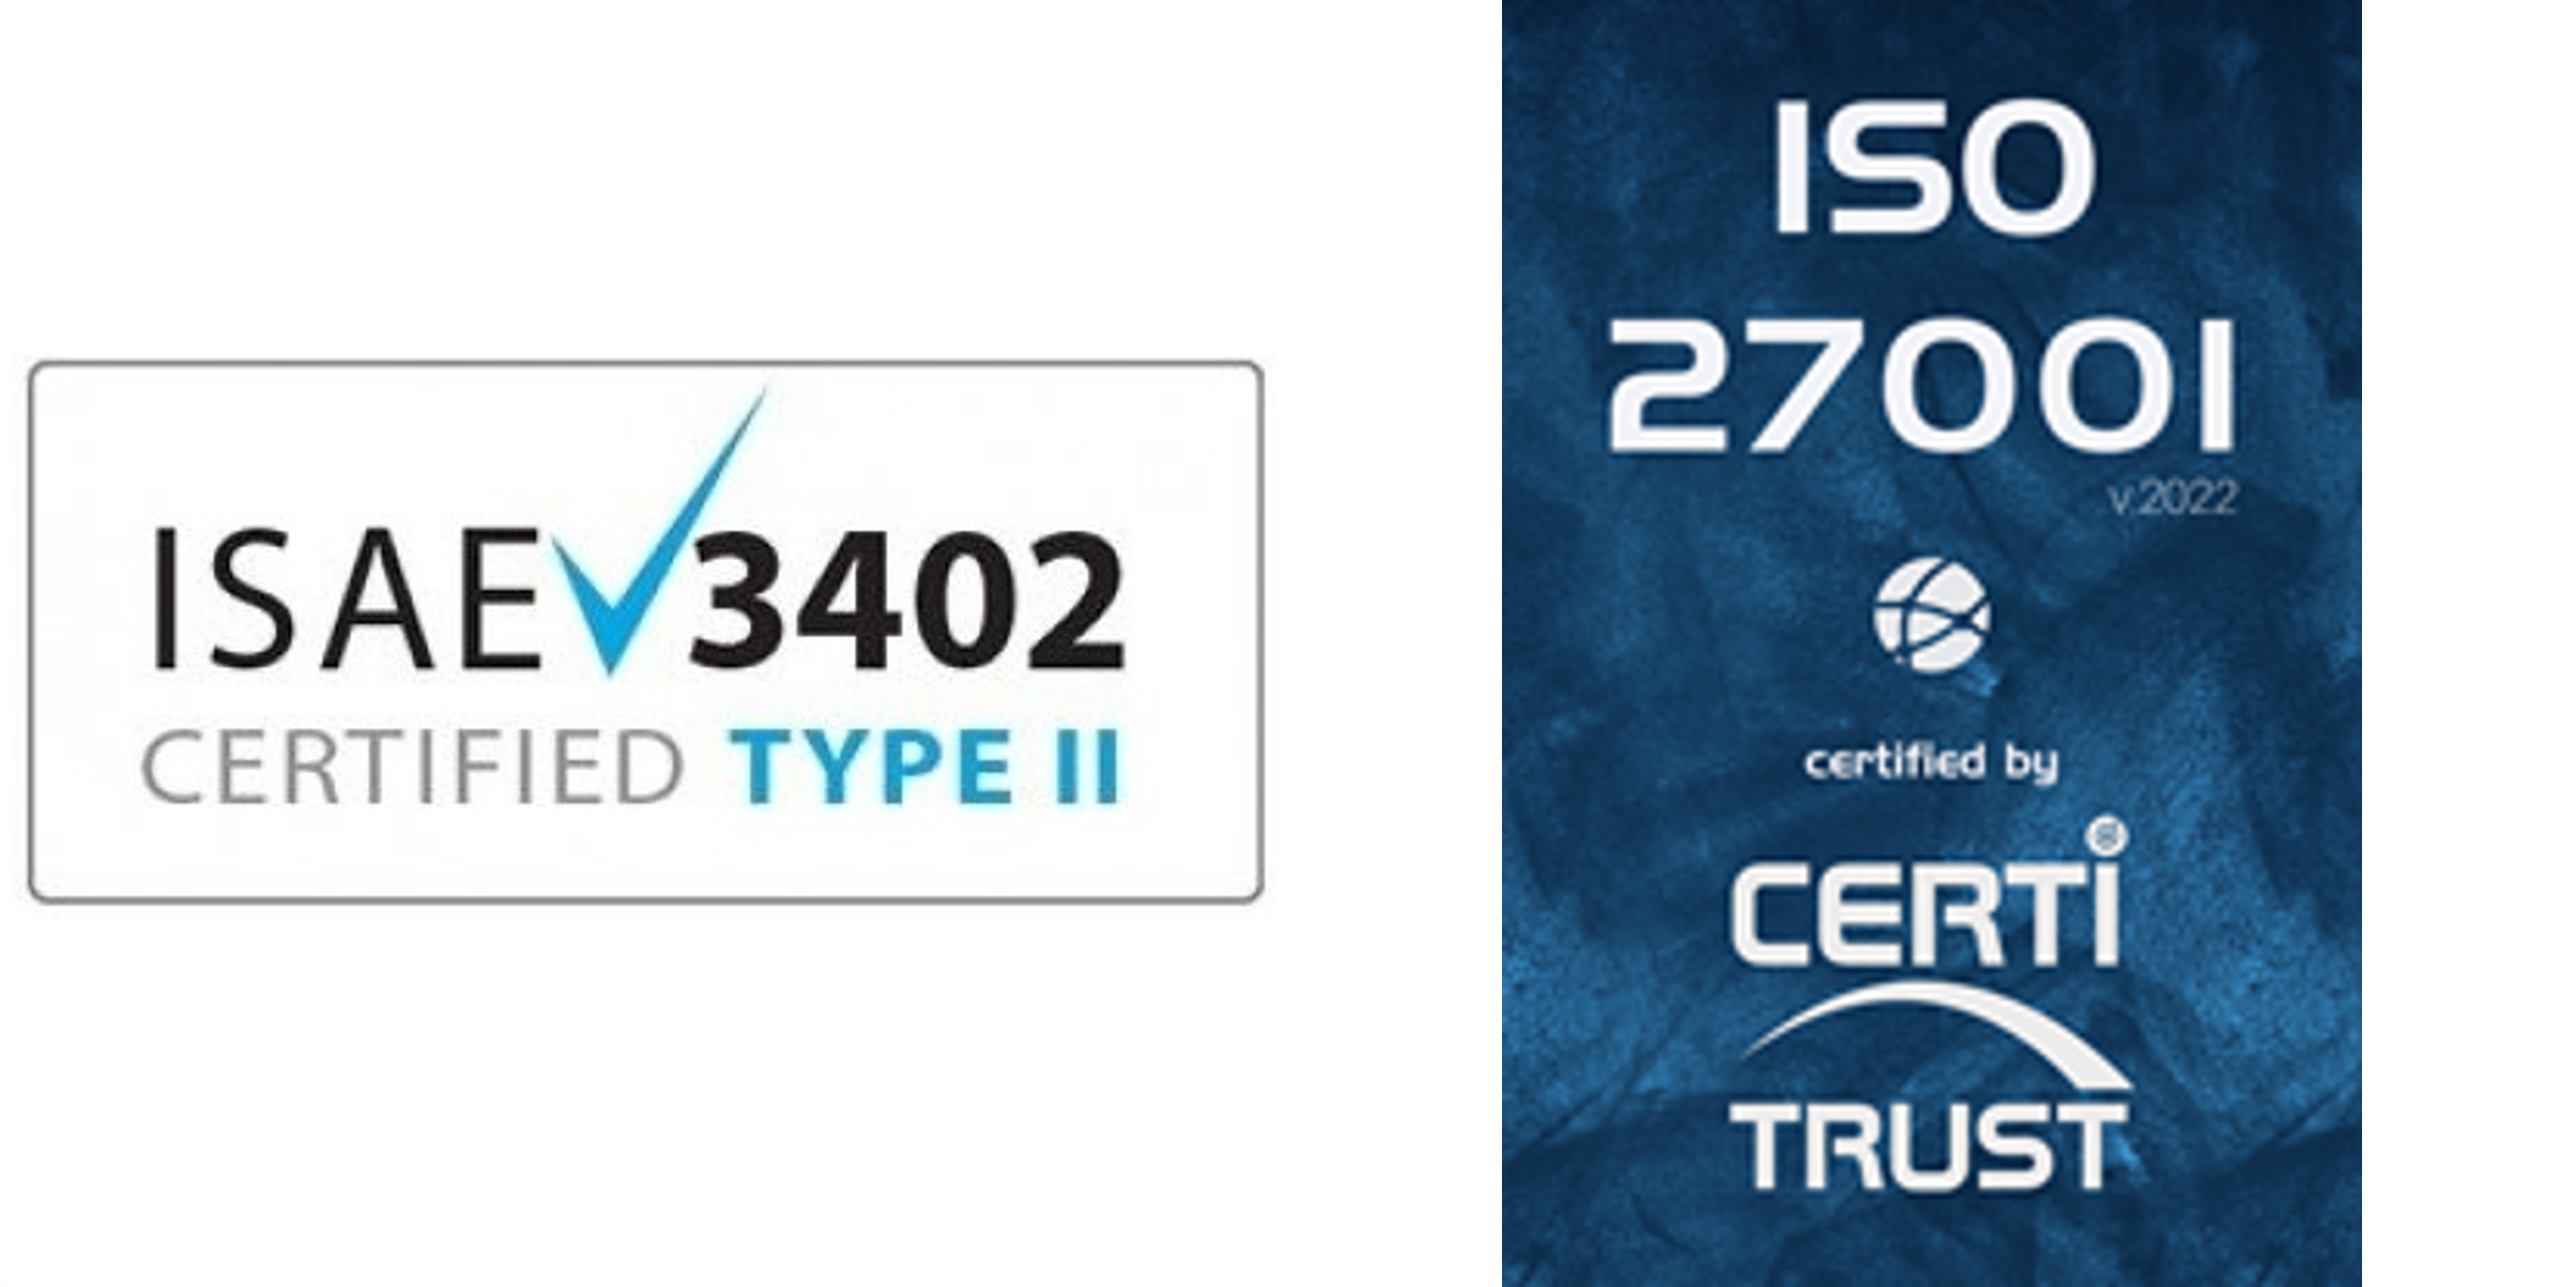 ISO 27001 and ISAE